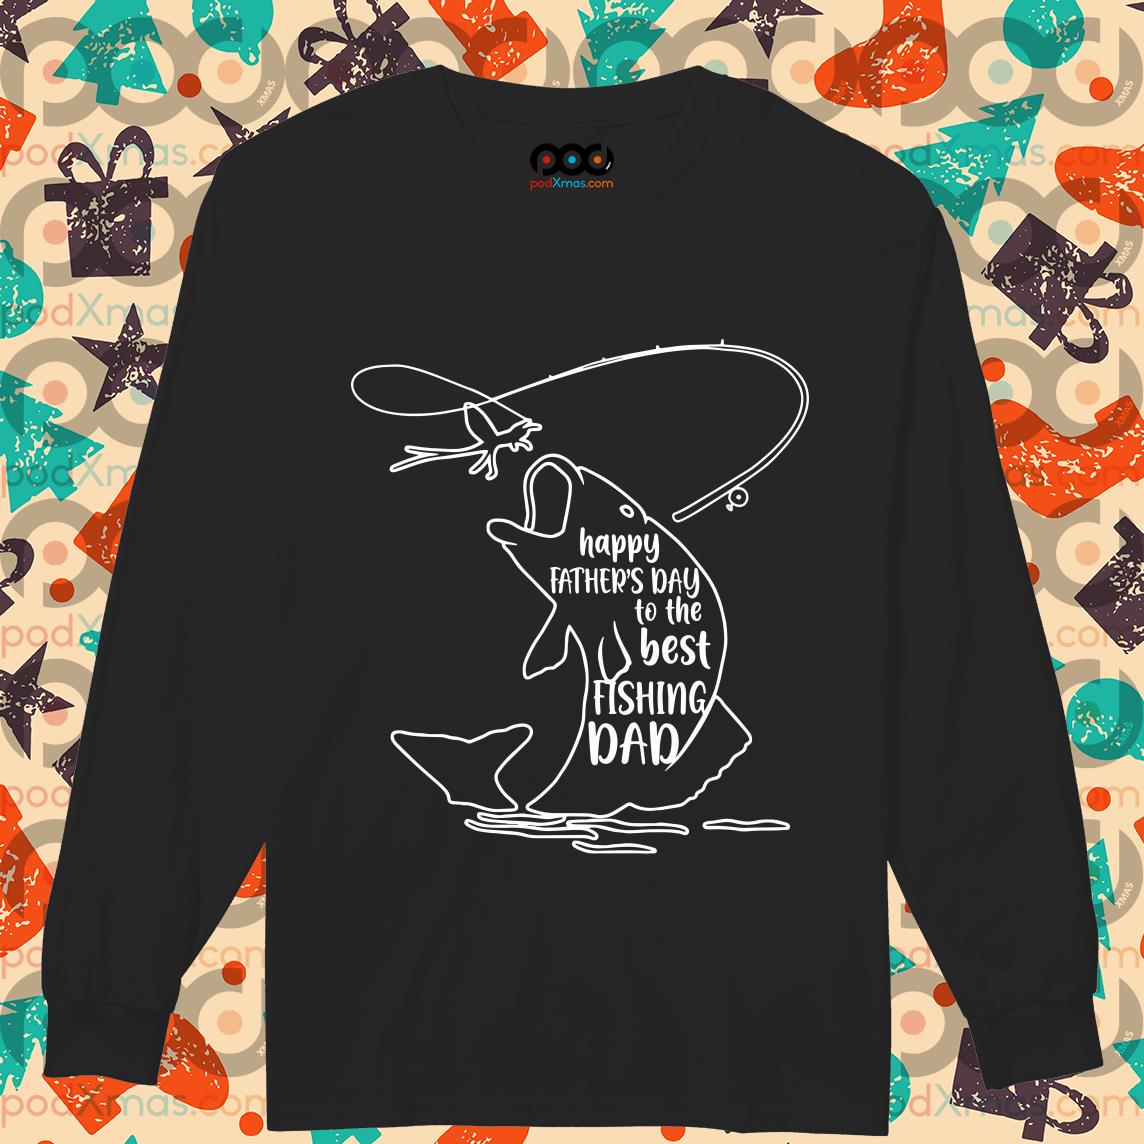 Get Happy Father's Day to the best fishing Dad shirt For Free